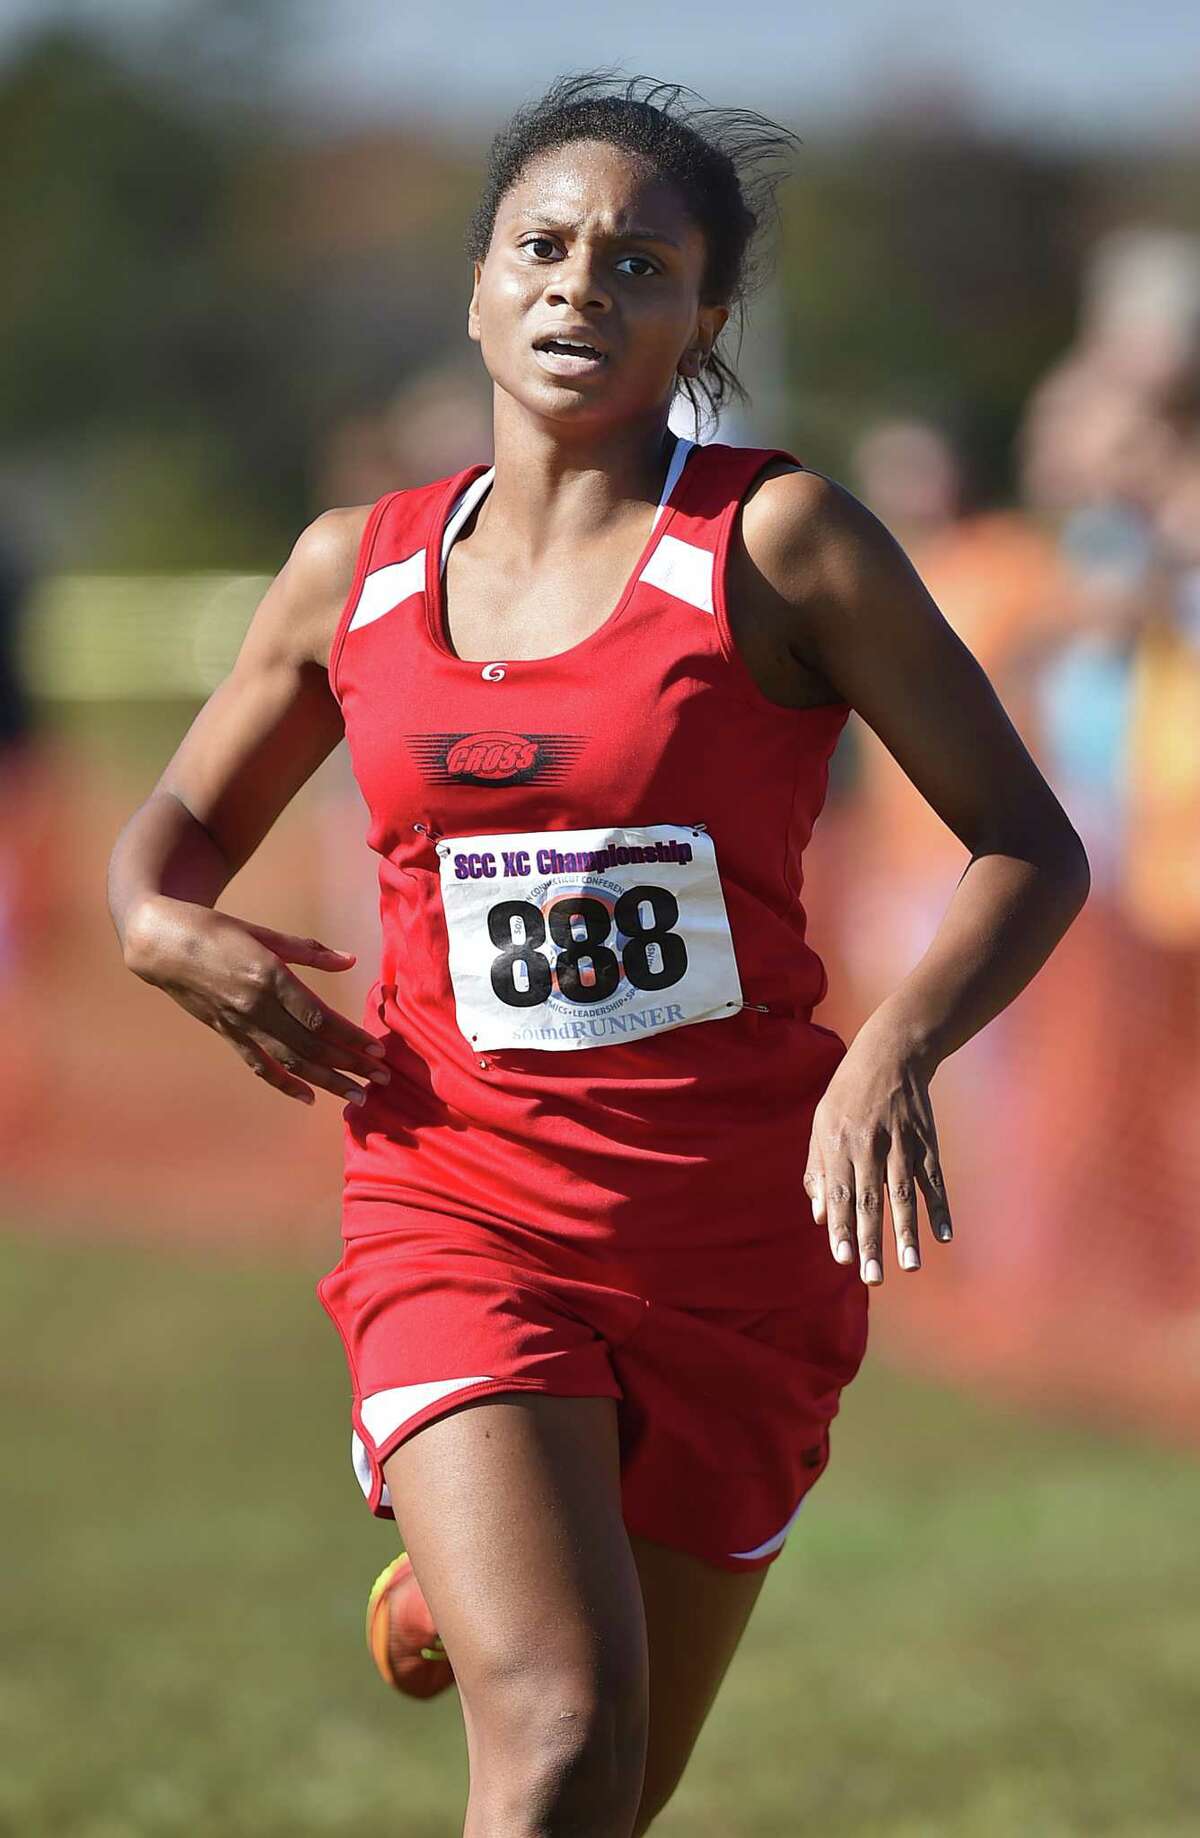 Junior Danae Rivers of Wilbur Cross finished in second place Friday at the SCC Cross Country Championships. Photo by Catherine Avalone/Register